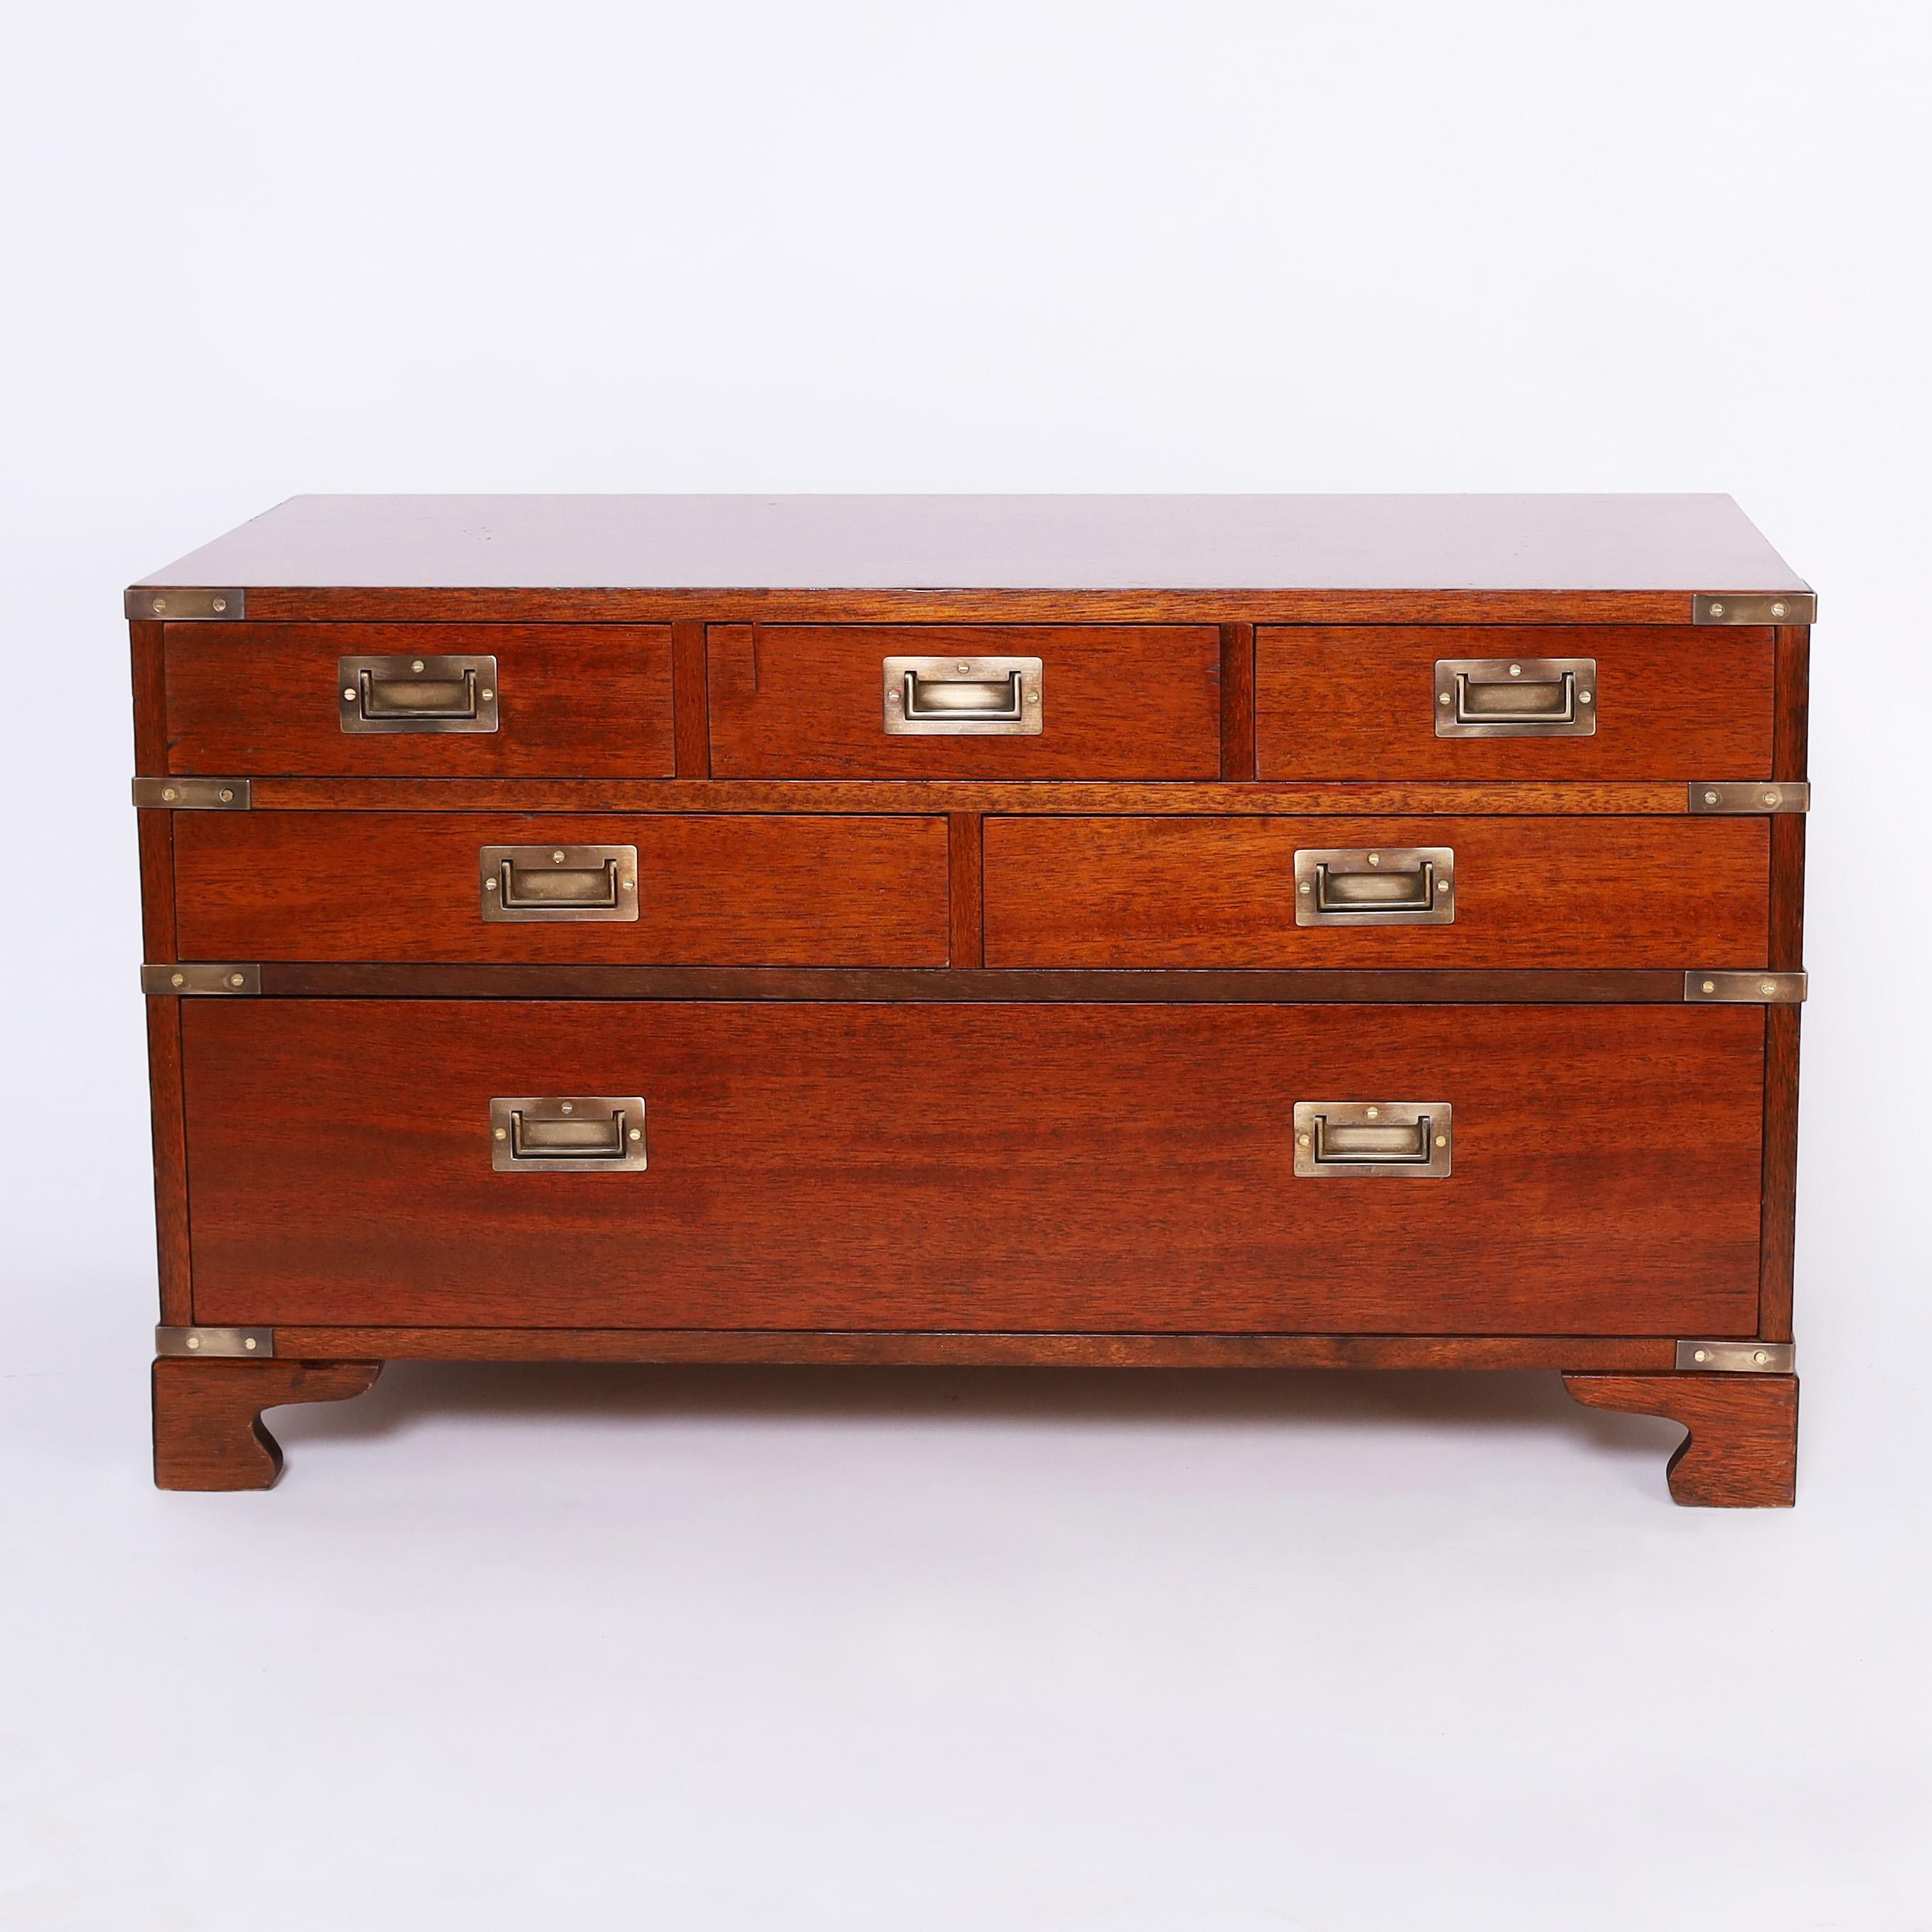 Handsome British Colonial chest crafted in mahogany with six drawers in a low profile with brass campaign hardware and bracket feet.